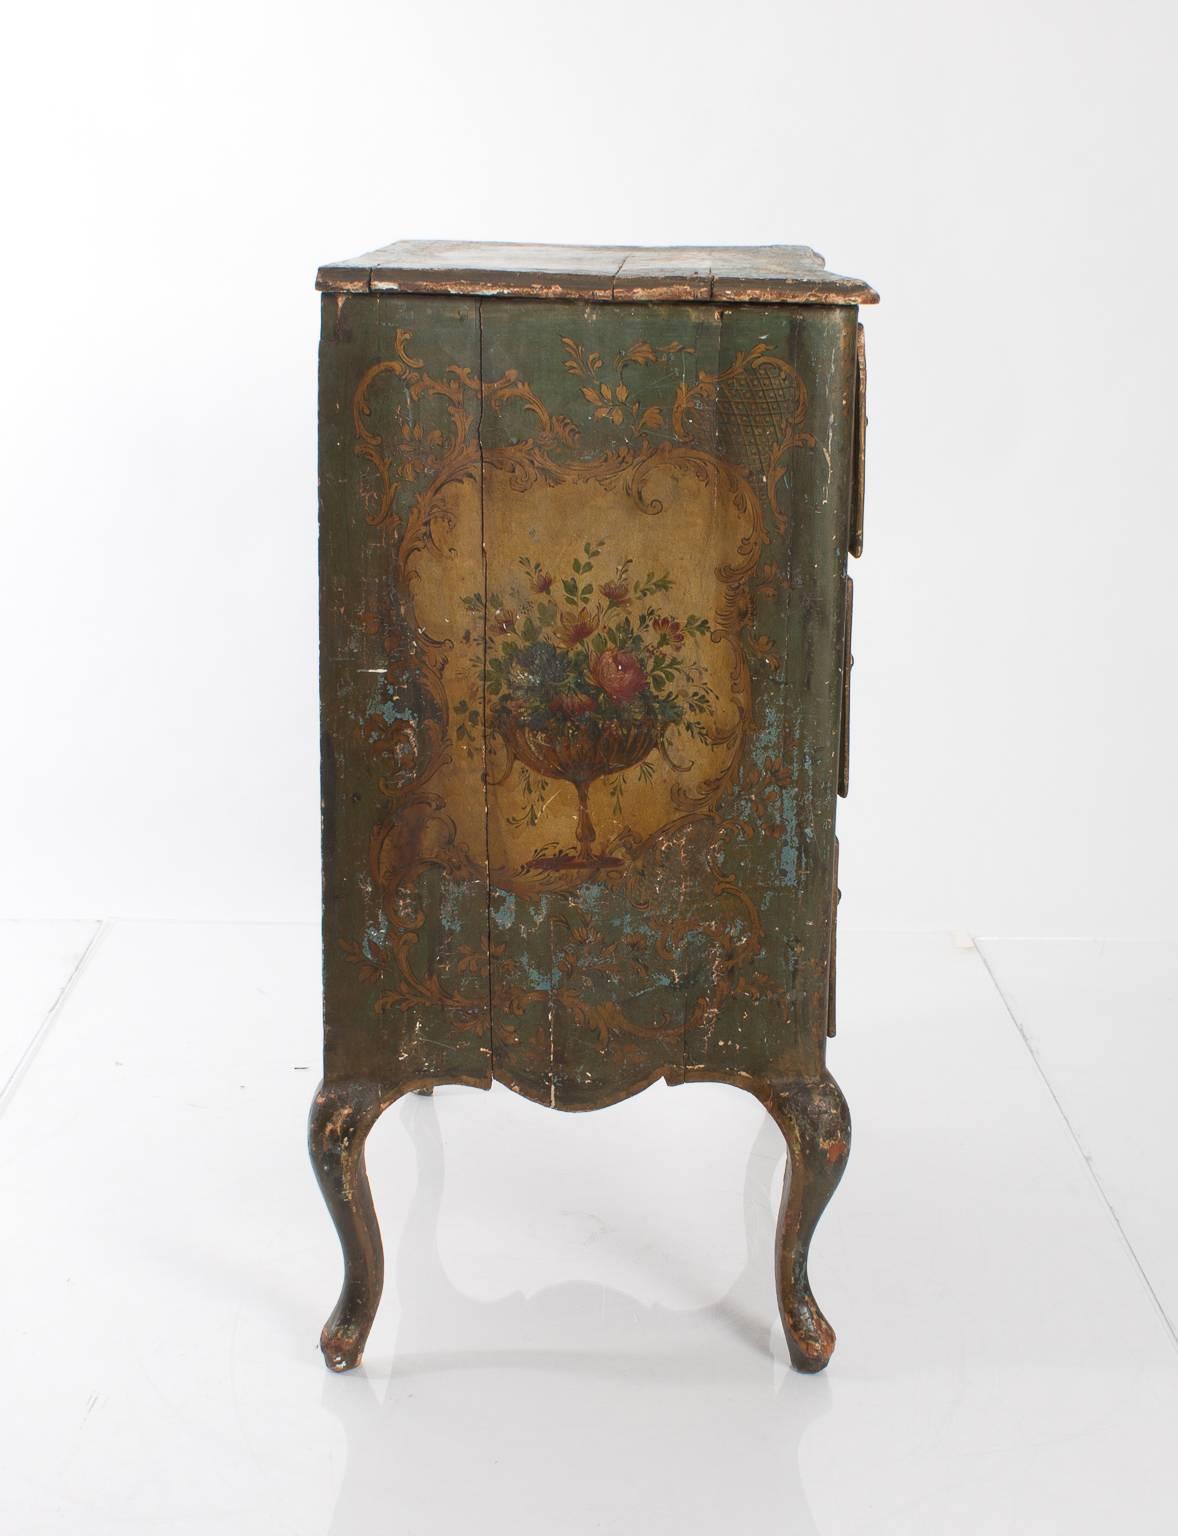 Early 19th century, painted Venetian three-drawer commode with cabriole legs. Floral hand-painted sidepanels and drawers.